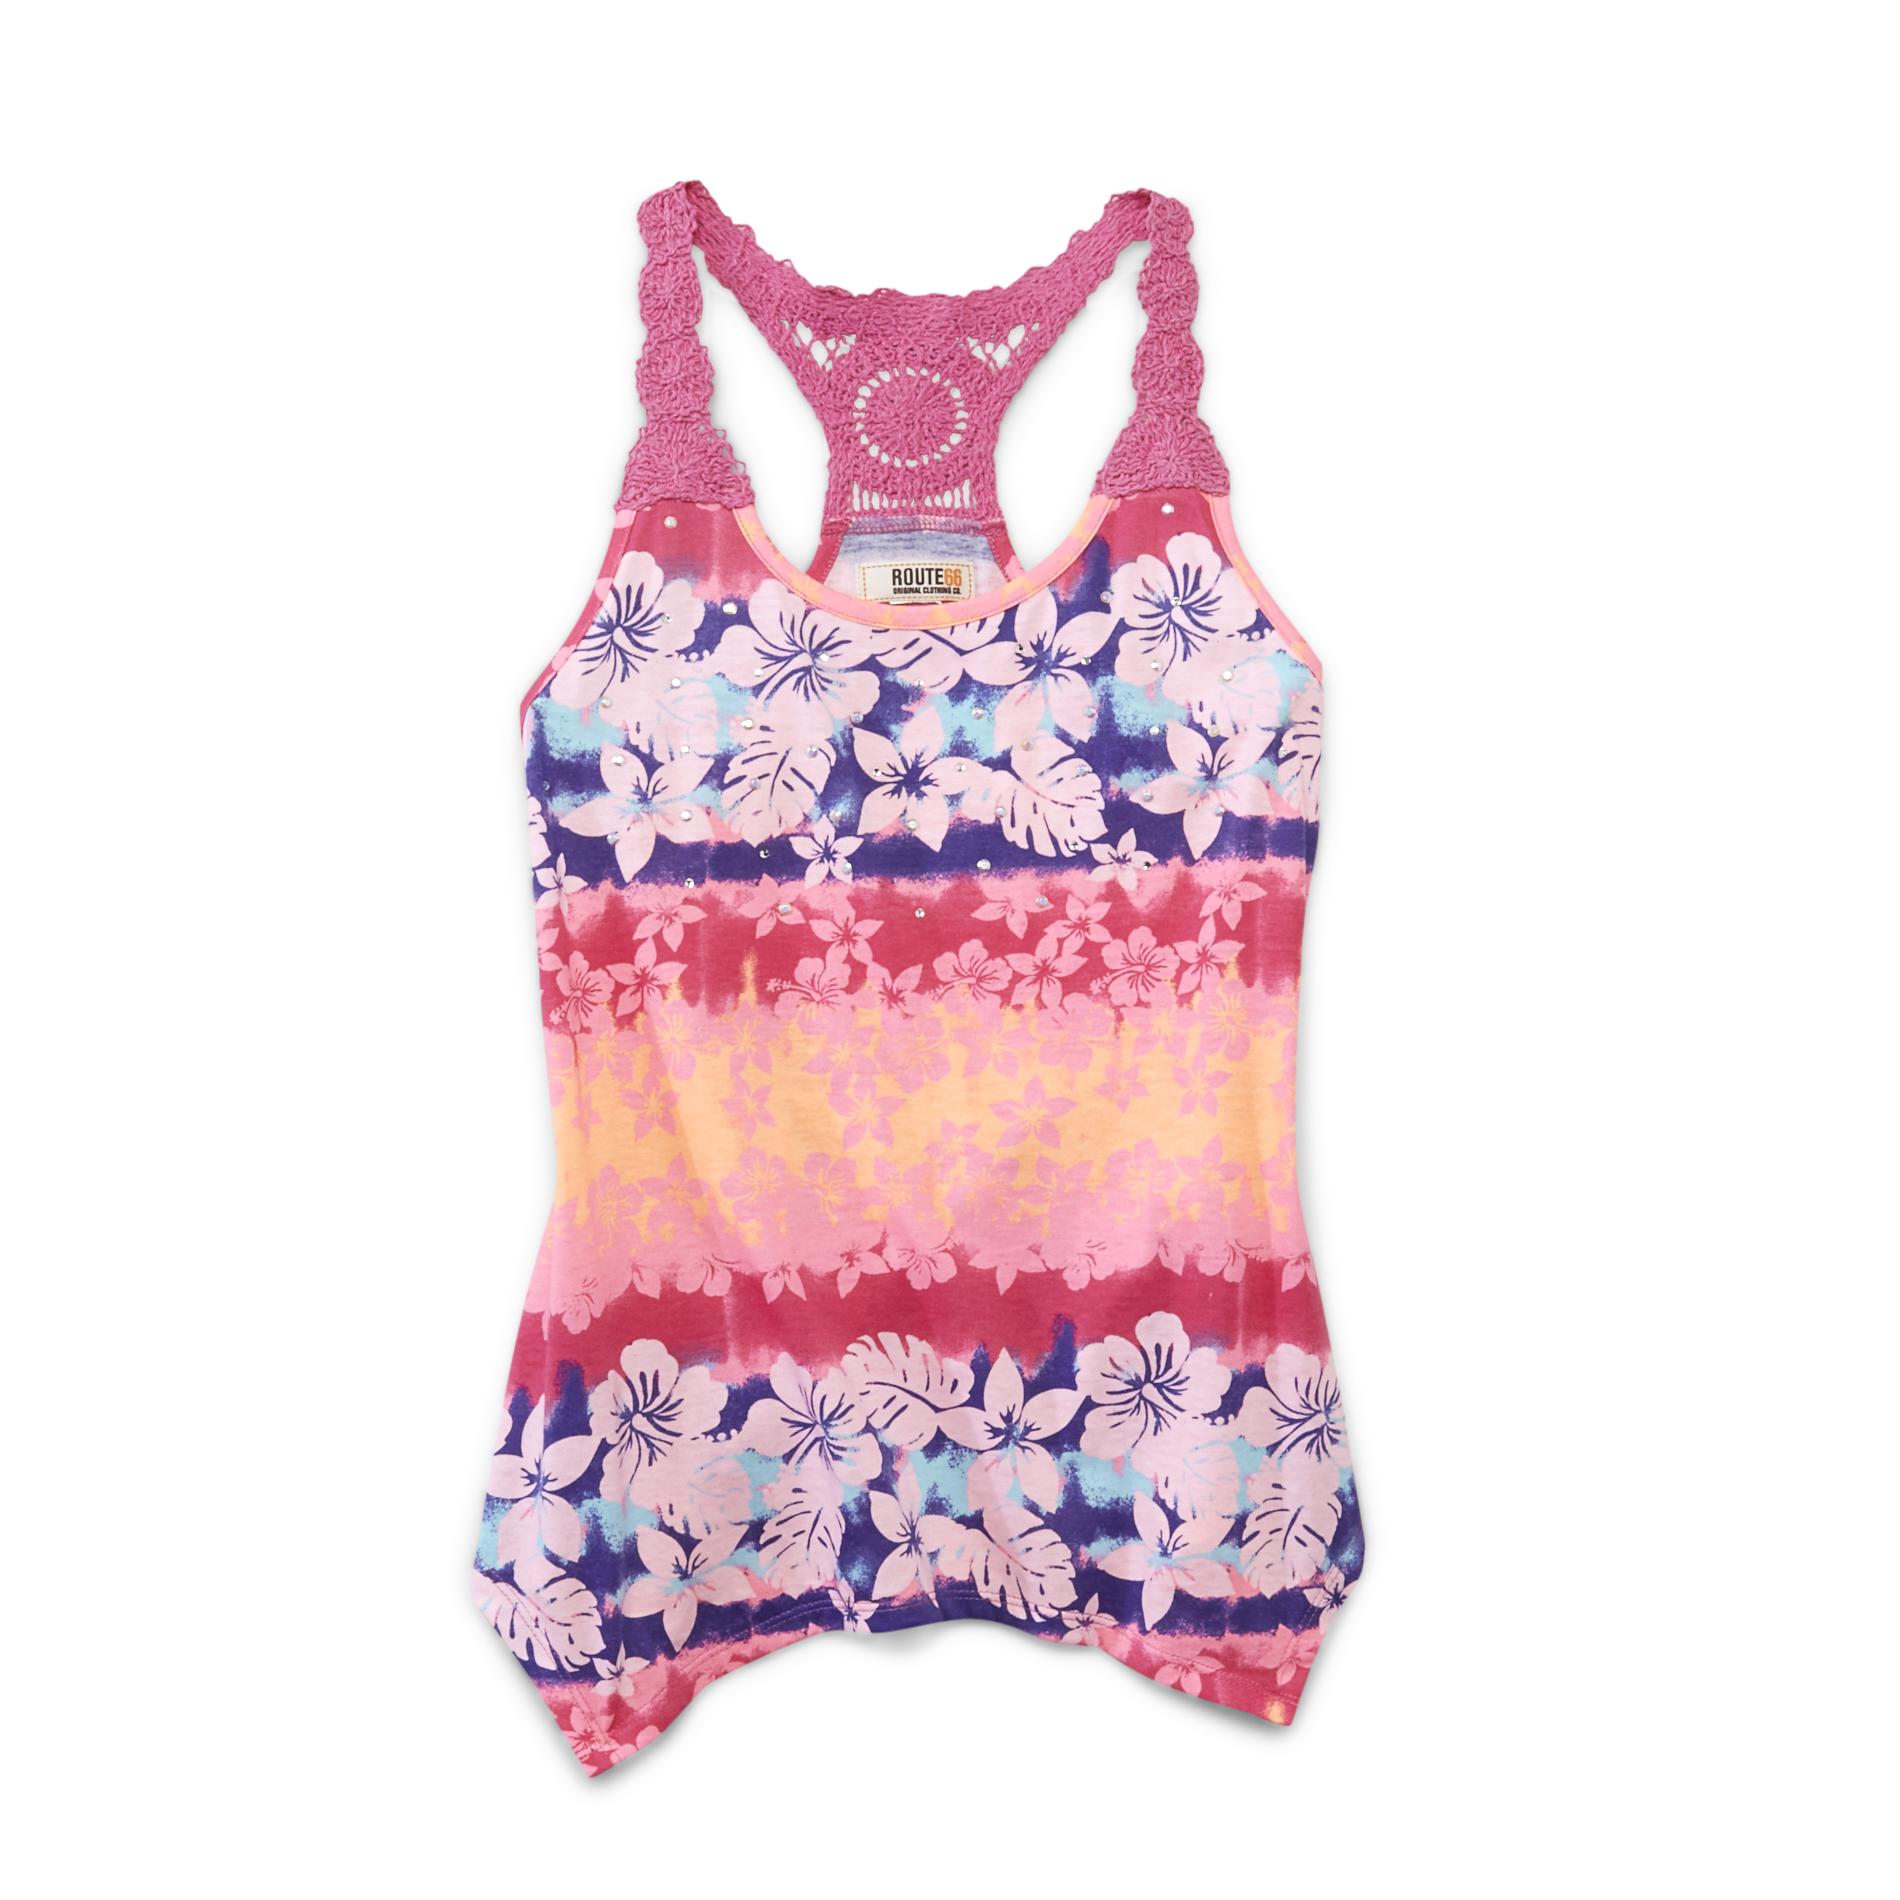 Route 66 Girl's Crocheted Racerback Tank Top - Floral Ombre